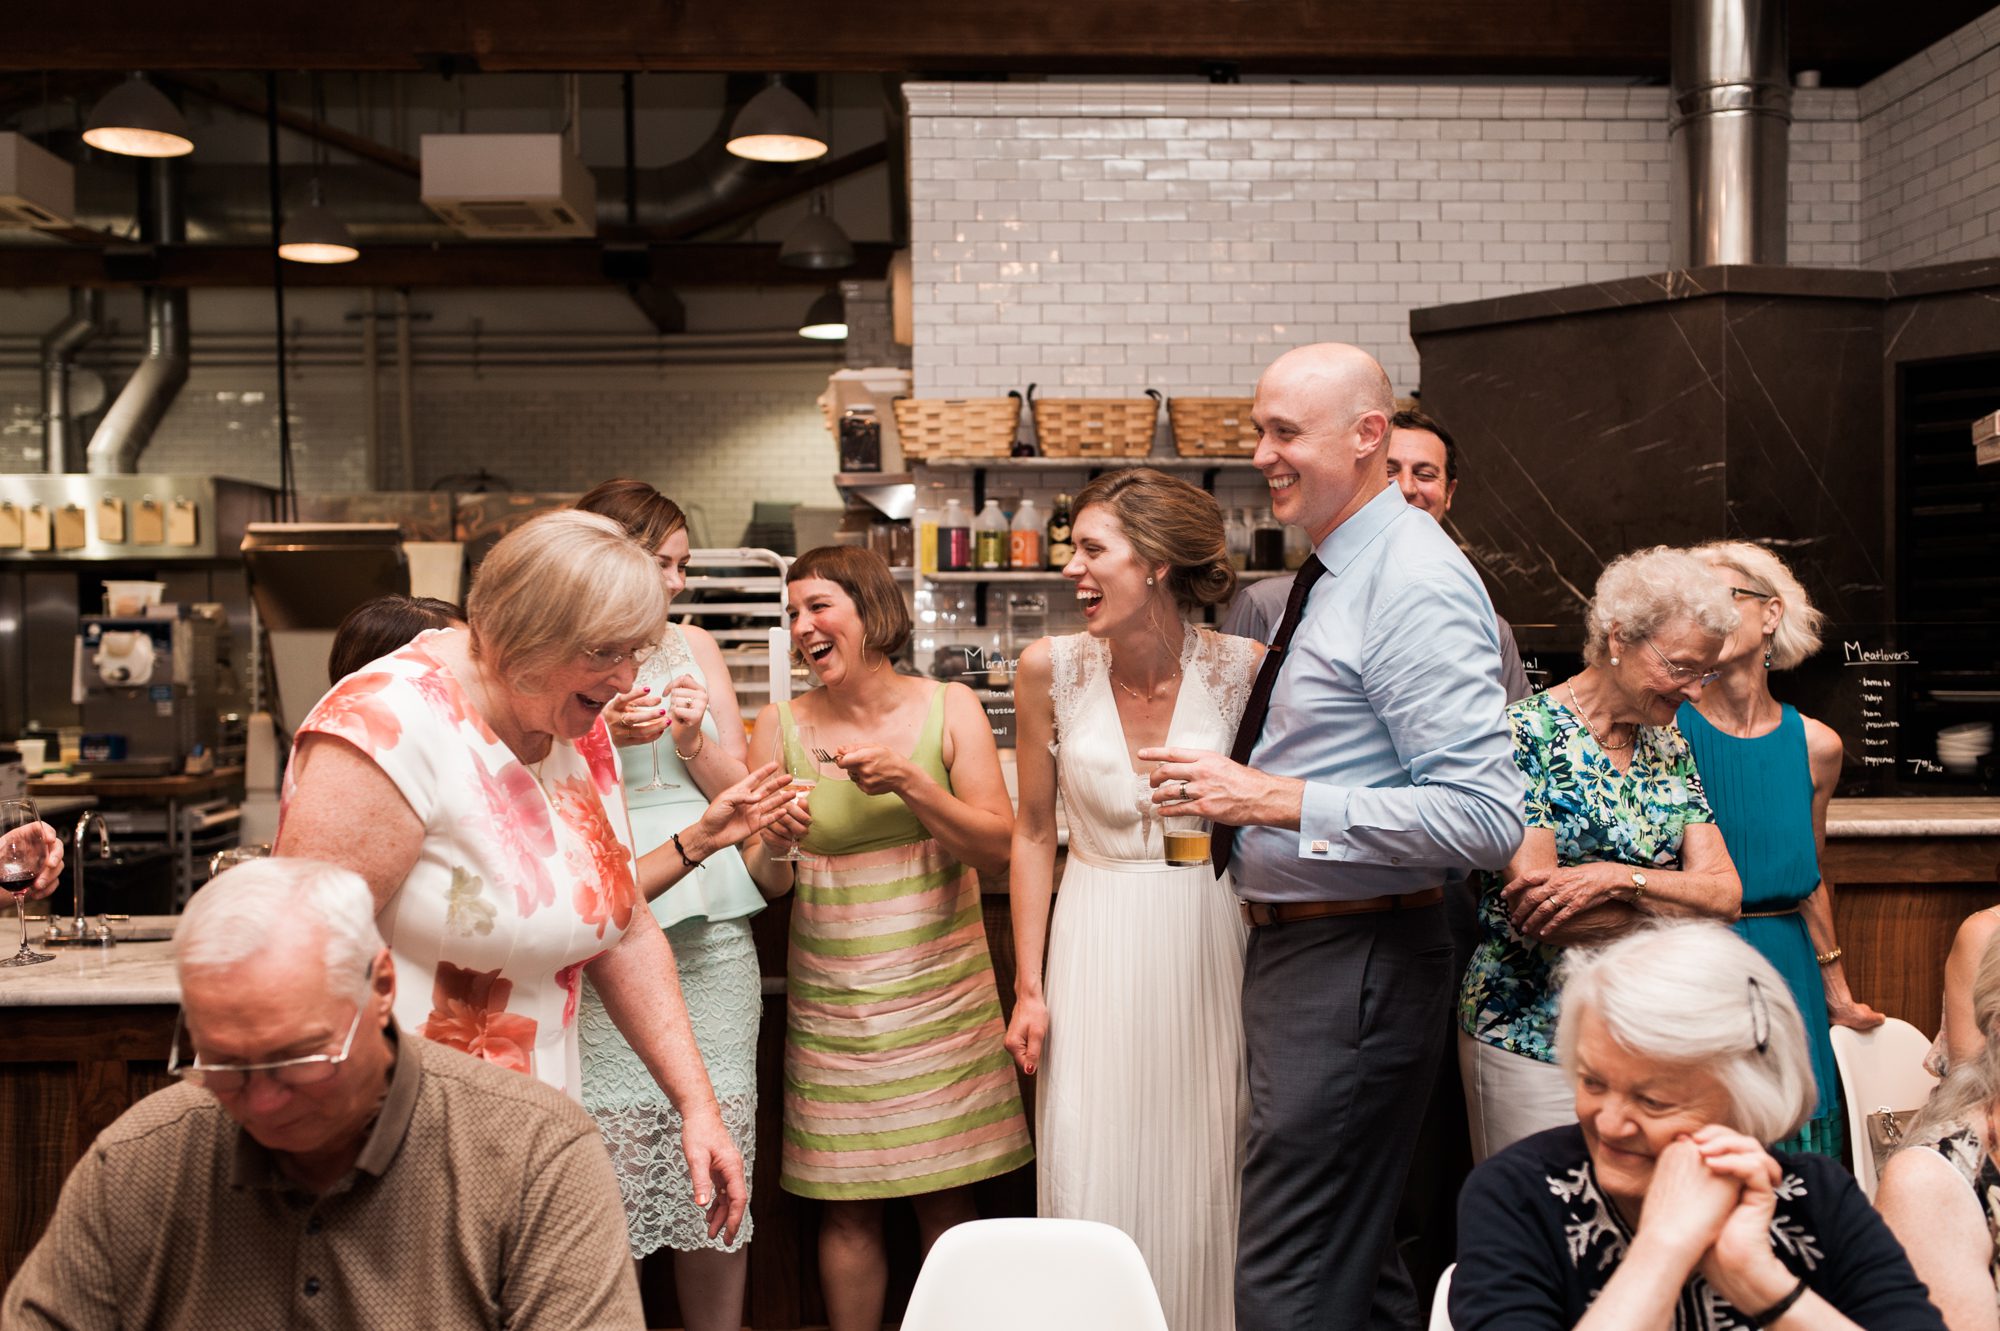 The bride and groom laugh with their wedding guests during their reception at Roman Candle Baking Co. By Laurelhurst Park wedding photographer Briana Morrison